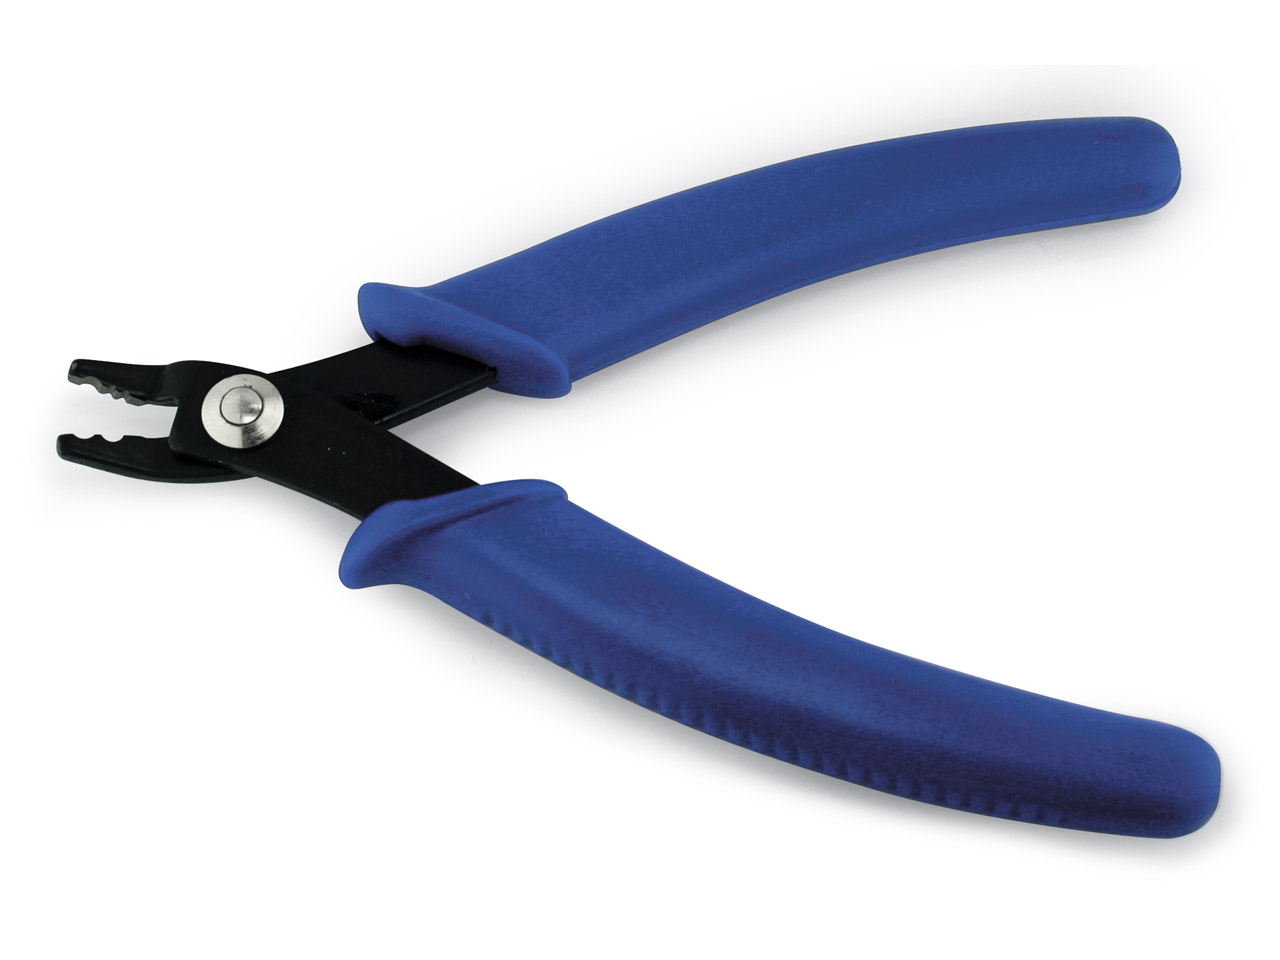 Beading Guide: How to Choose the Right Size Crimping Pliers